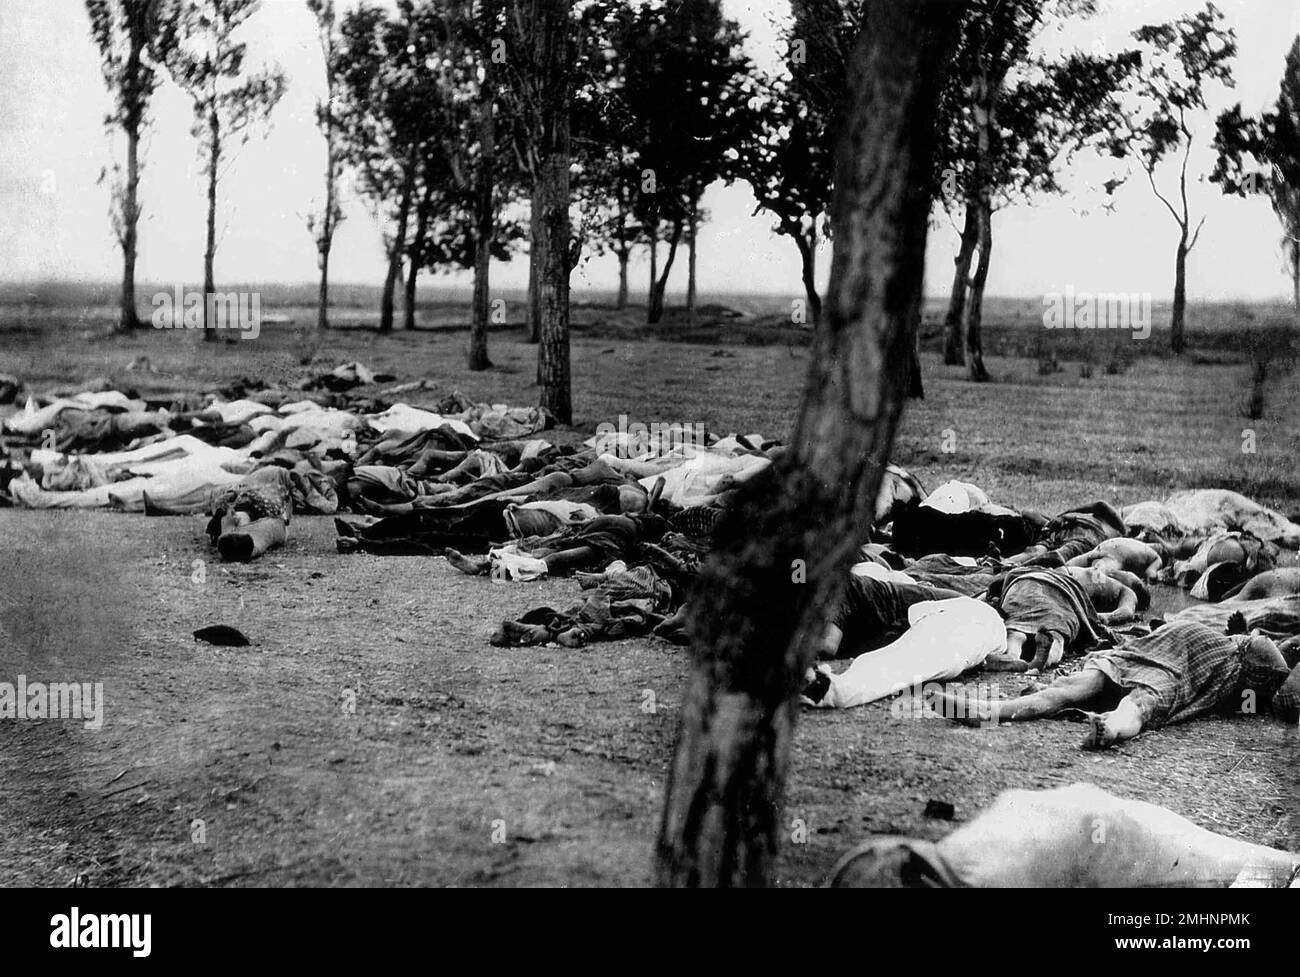 The corpses of Armenians beside a road, a common sight along deportation routes Stock Photo